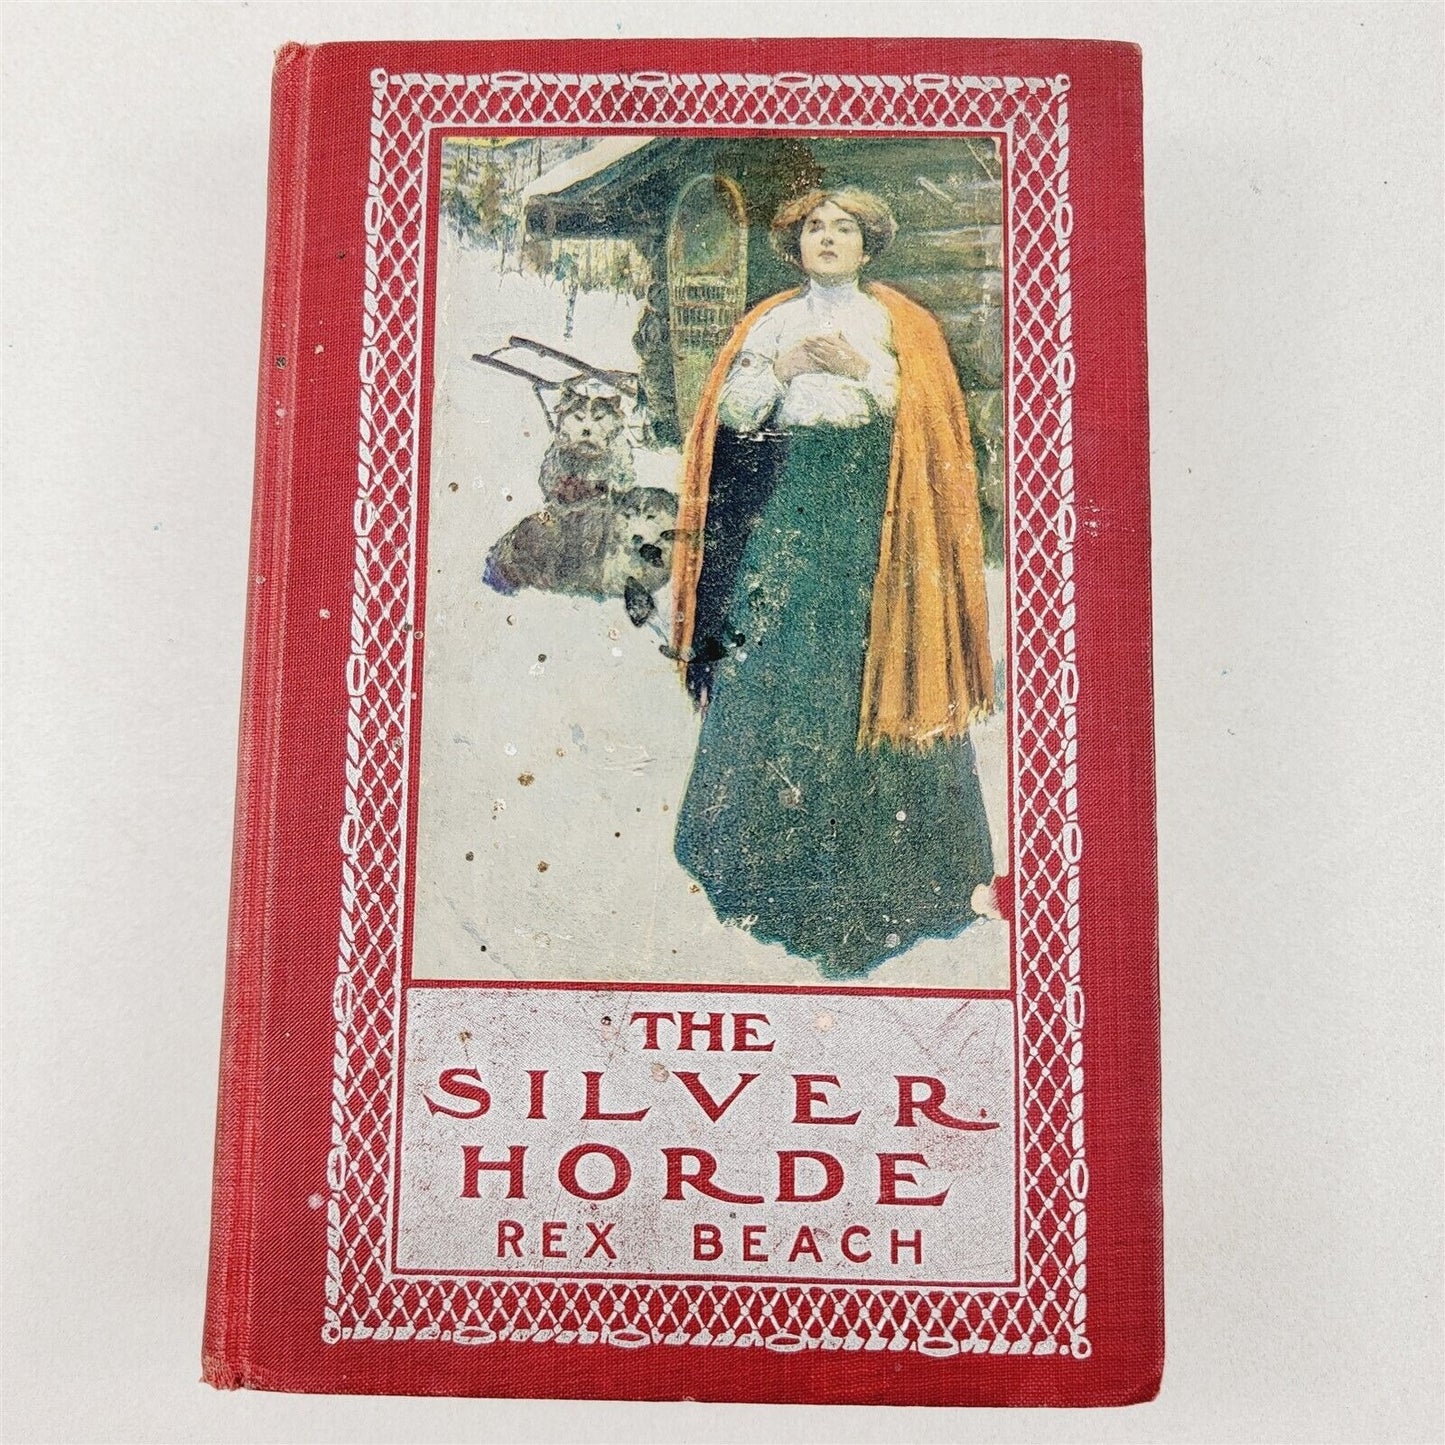 The Silver Horde book by Rex Beach 1909 First Edition Illus by Harvey T. Dunn